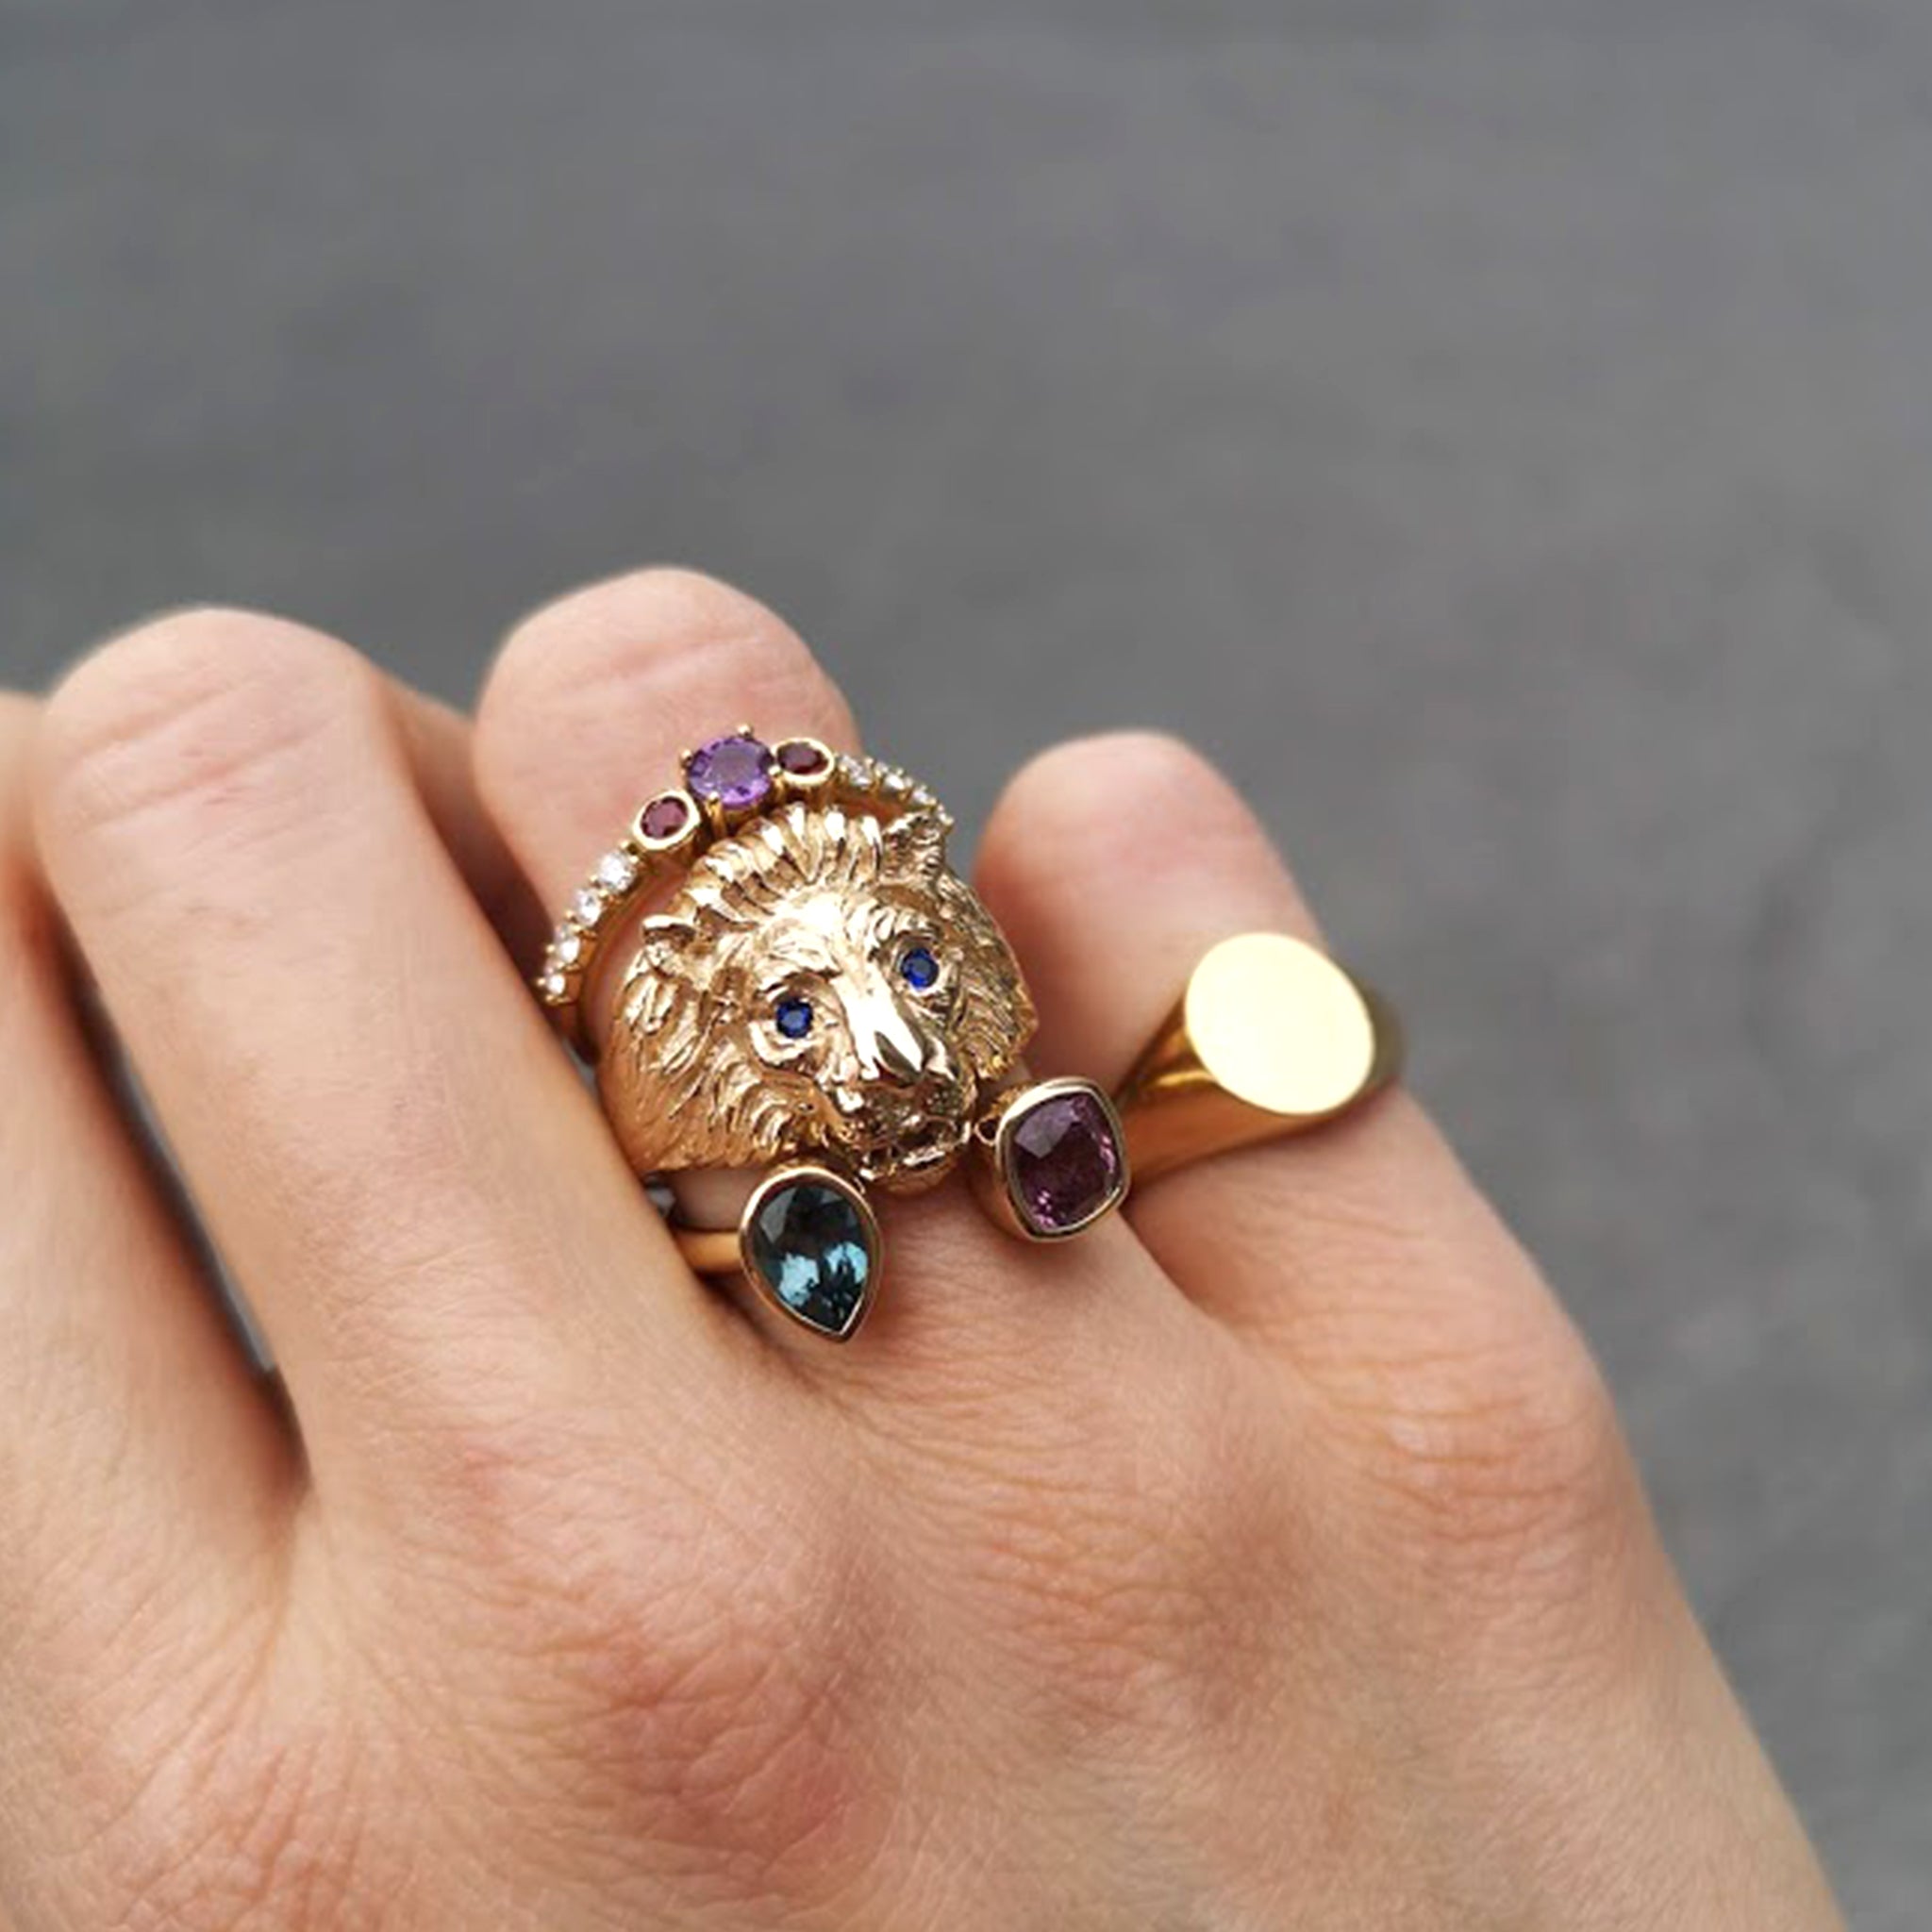 Model's Hand with Sultan Ring, Leo Lion Ring, and another Ring against Sky Background - Lico Jewelry Montreal